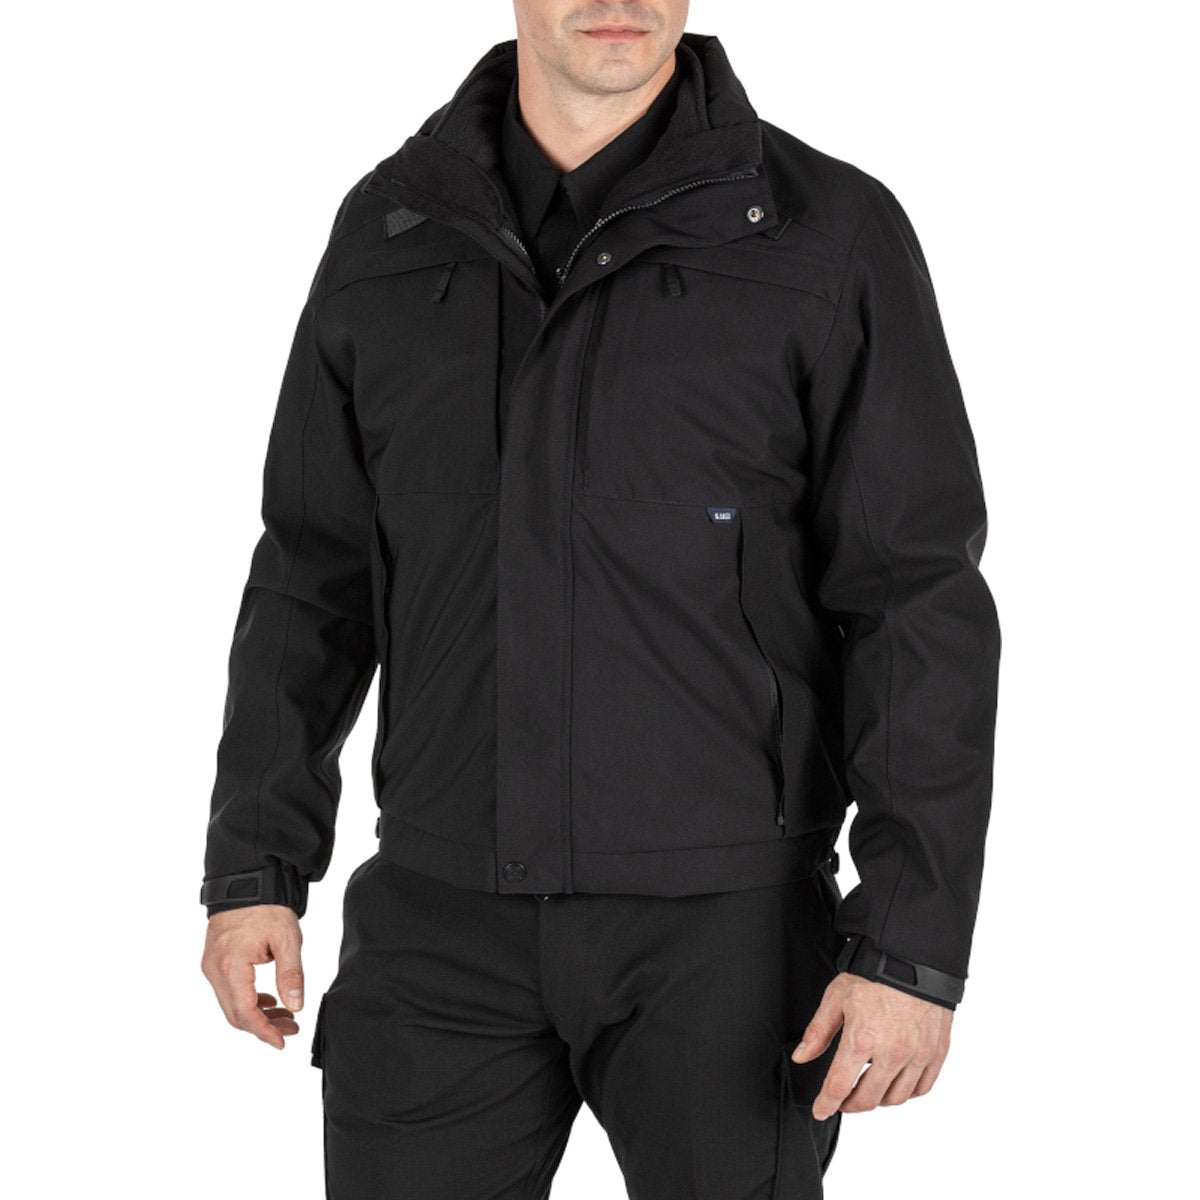 5.11 Tactical 5-IN-1 Jacket 2.0 Outerwear 5.11 Tactical Black Small Tactical Gear Supplier Tactical Distributors Australia